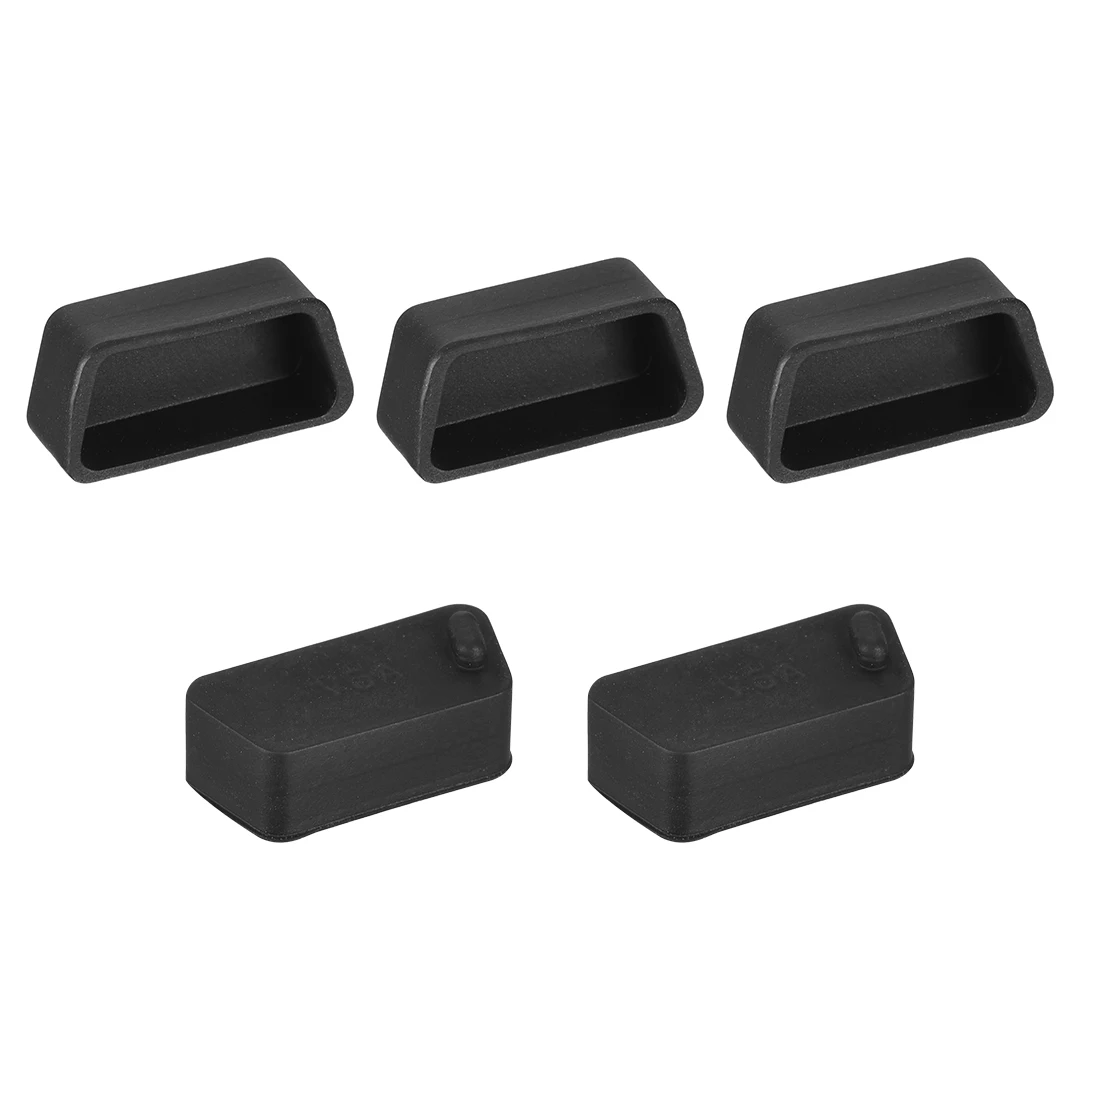 uxcell Black Rubber 6.35mm Audio Jack PC DVD Microphone Socket Dust Cover  10PCS